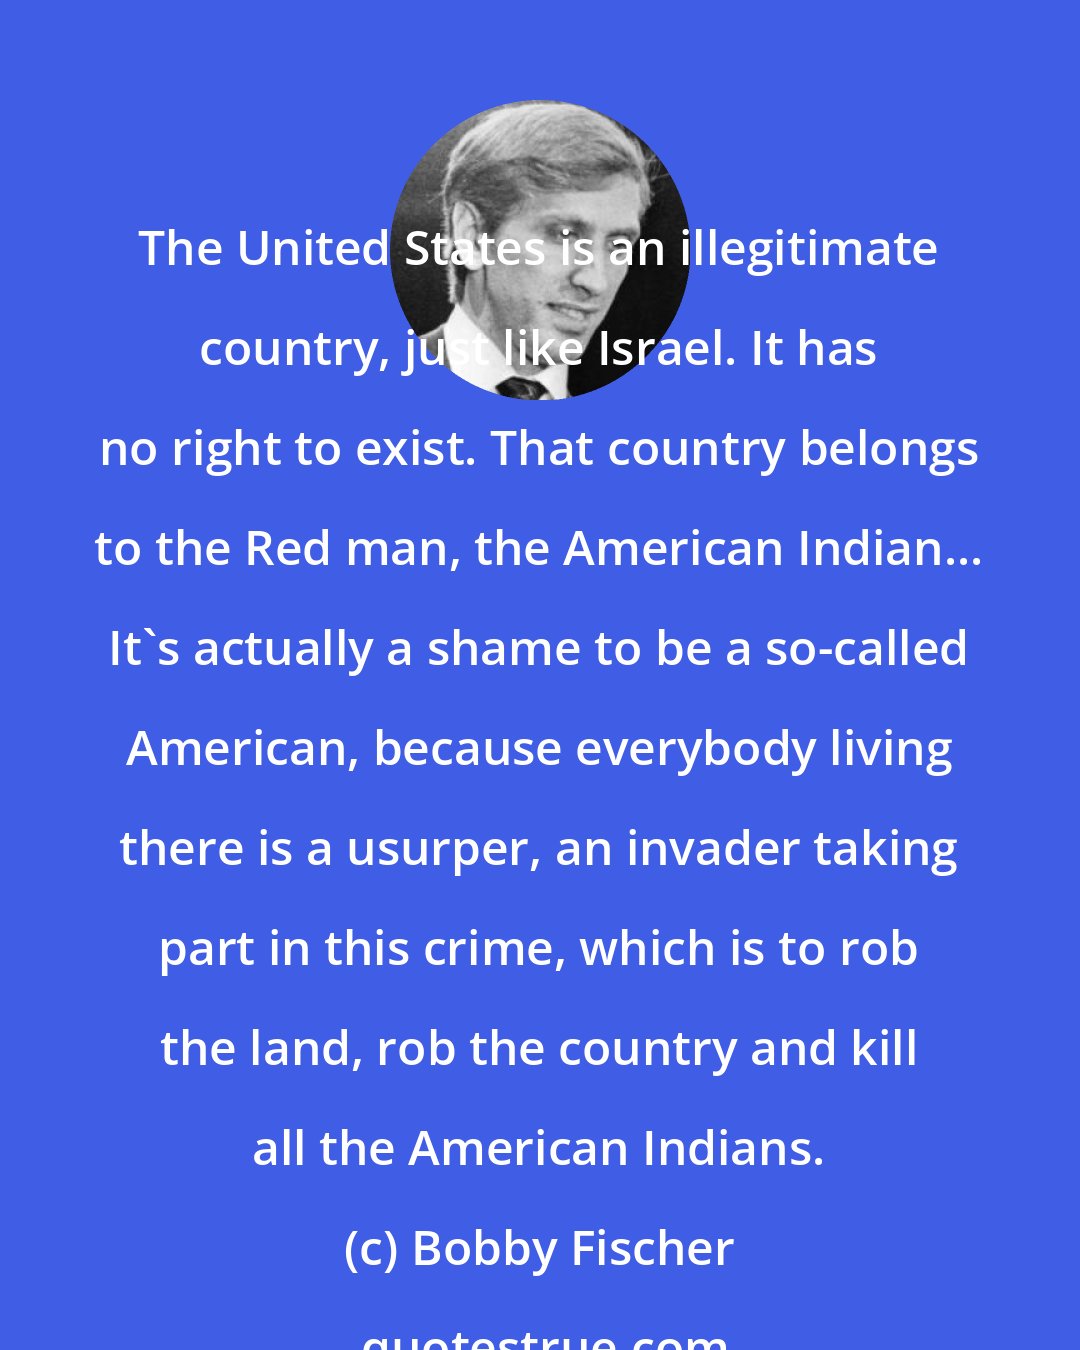 Bobby Fischer: The United States is an illegitimate country, just like Israel. It has no right to exist. That country belongs to the Red man, the American Indian... It's actually a shame to be a so-called American, because everybody living there is a usurper, an invader taking part in this crime, which is to rob the land, rob the country and kill all the American Indians.